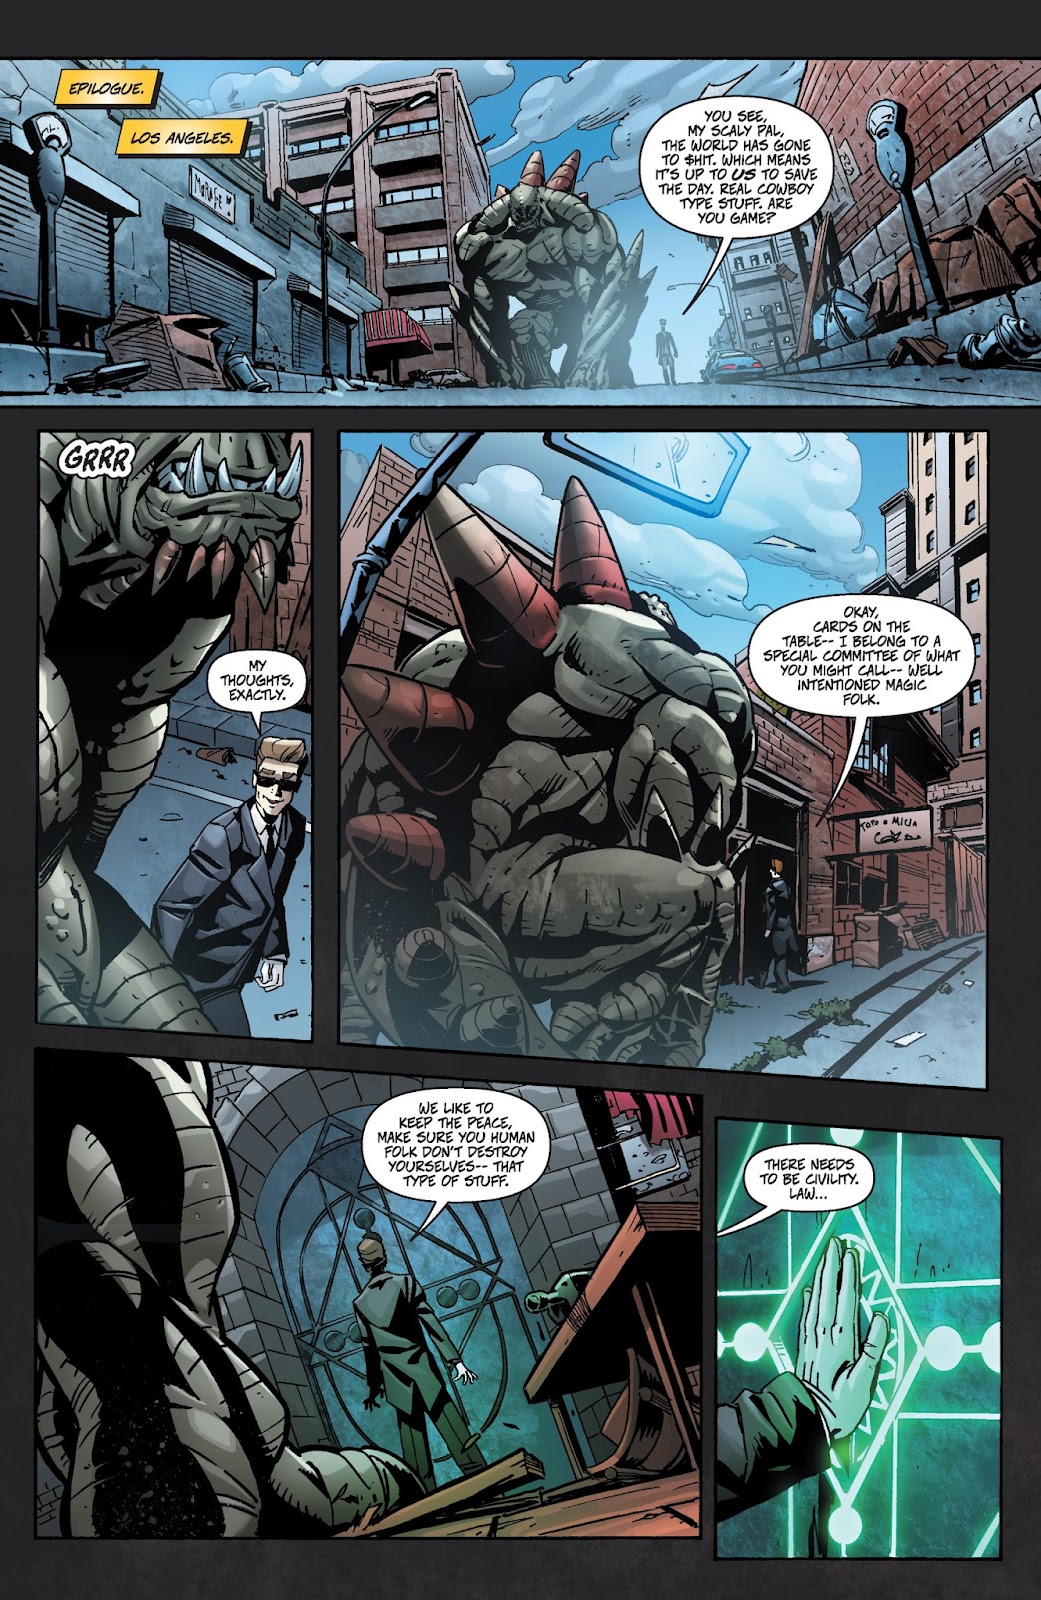 Charismagic (2013) issue 6 - Page 20